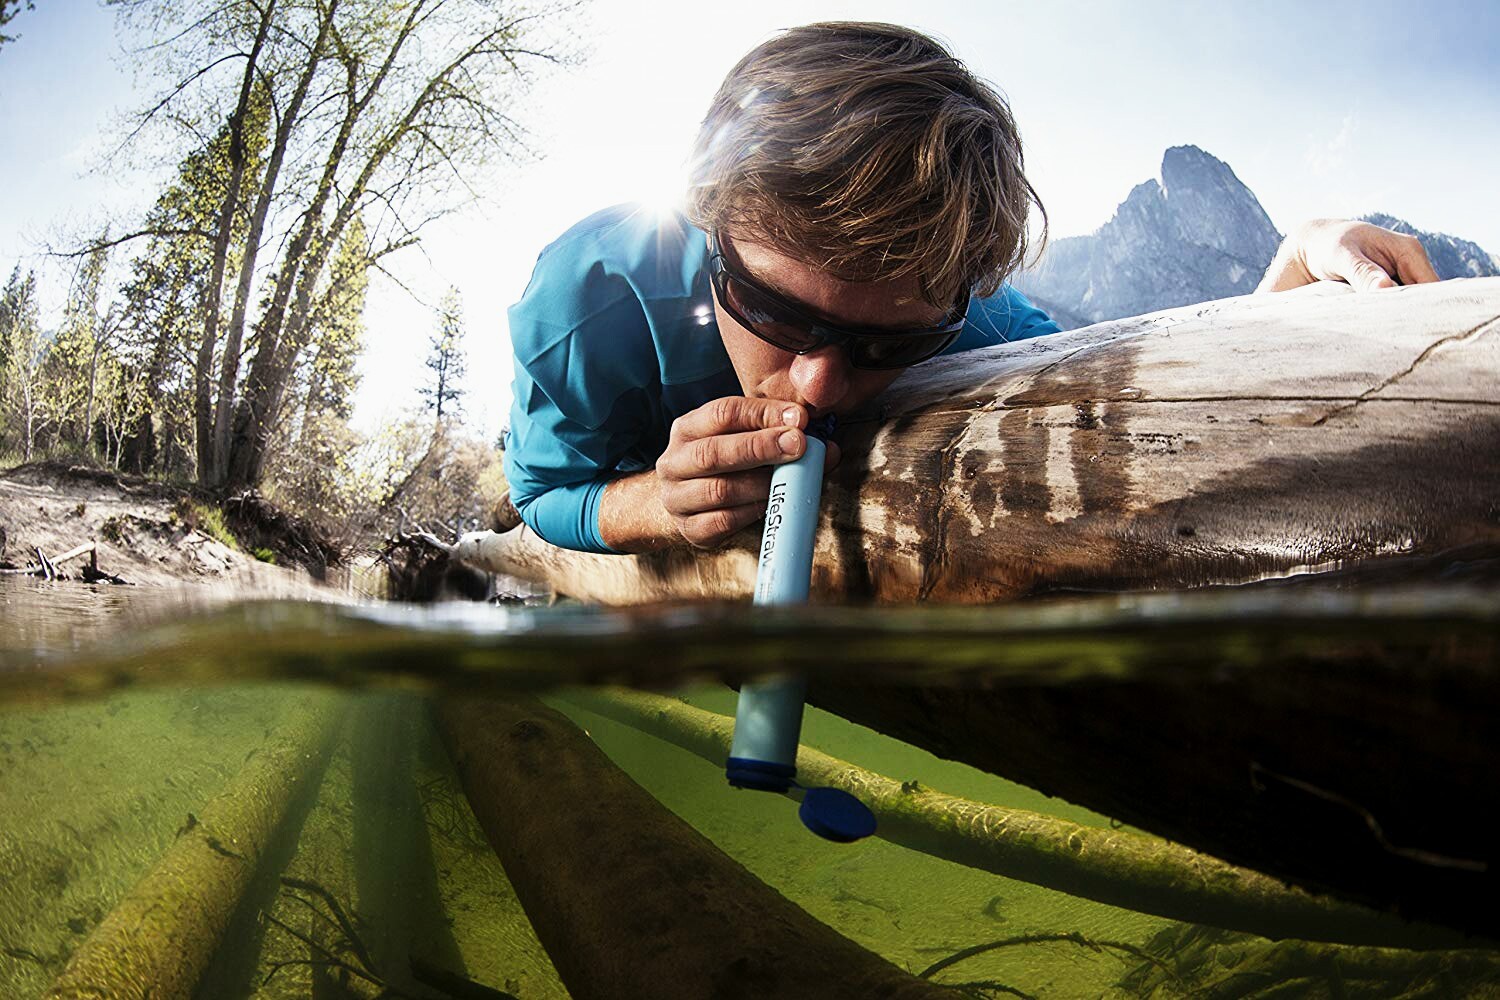 lifeStraw Water Filter Full Review